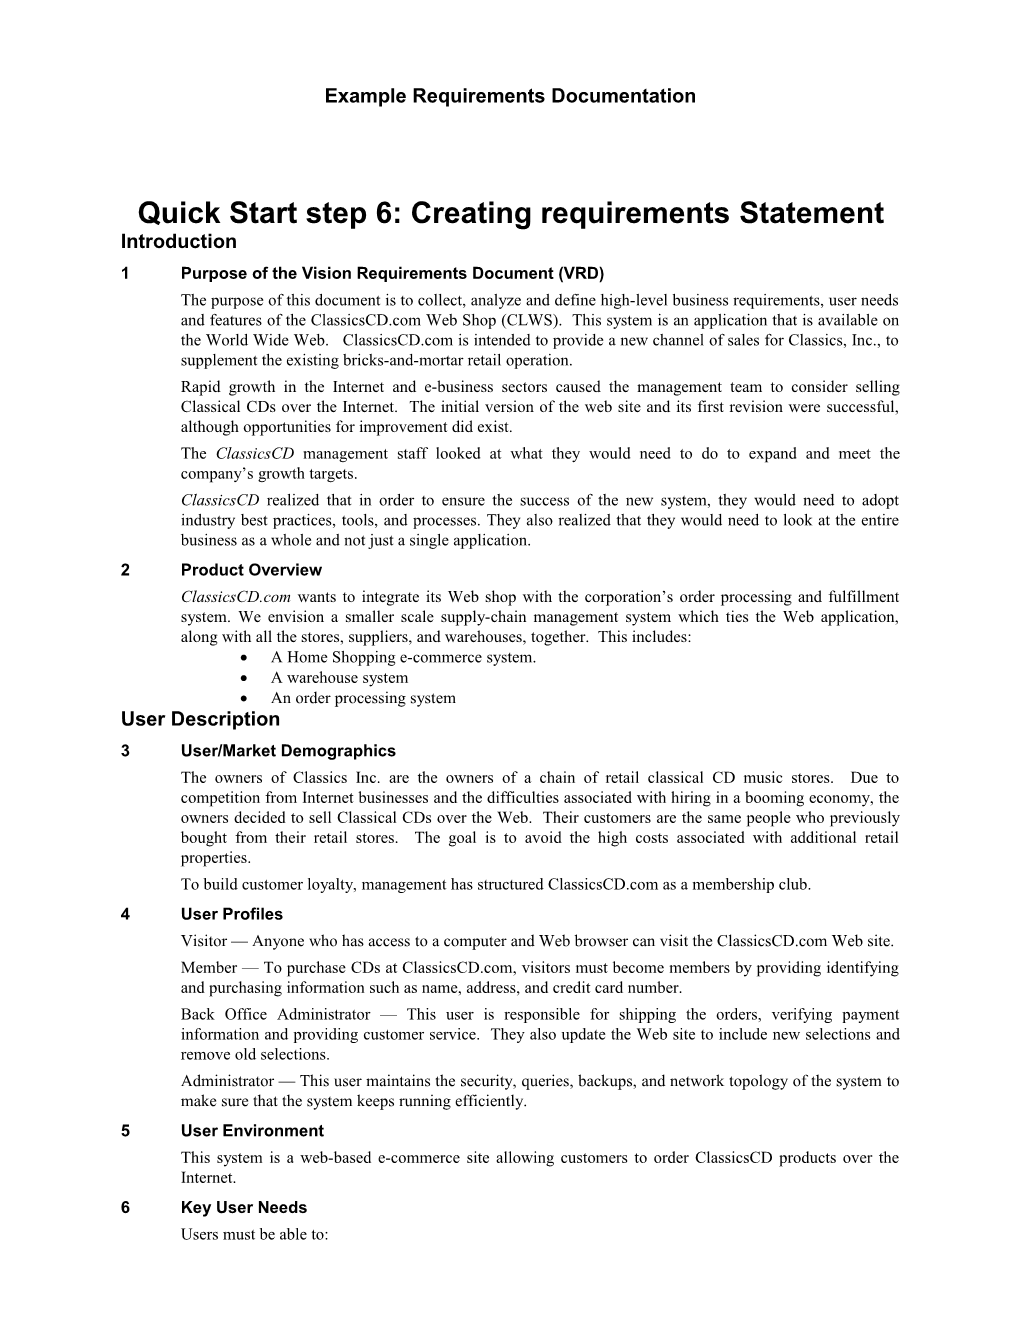 Quick Start Step 6: Creating Requirements